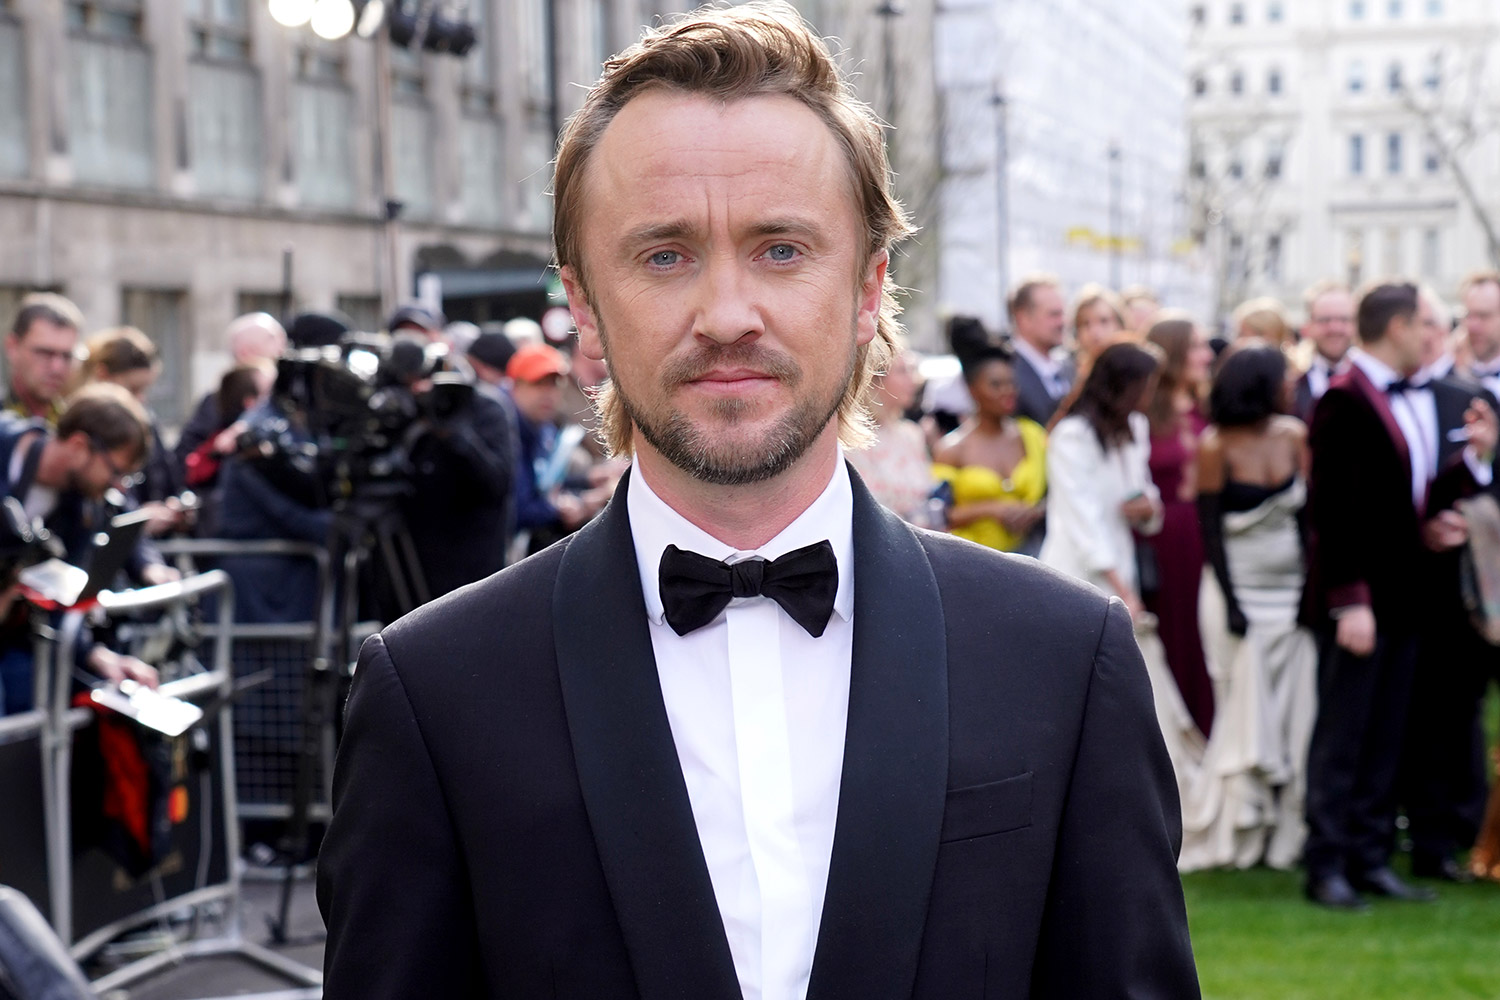 How much is Tom Felton's Net Worth in 2022?